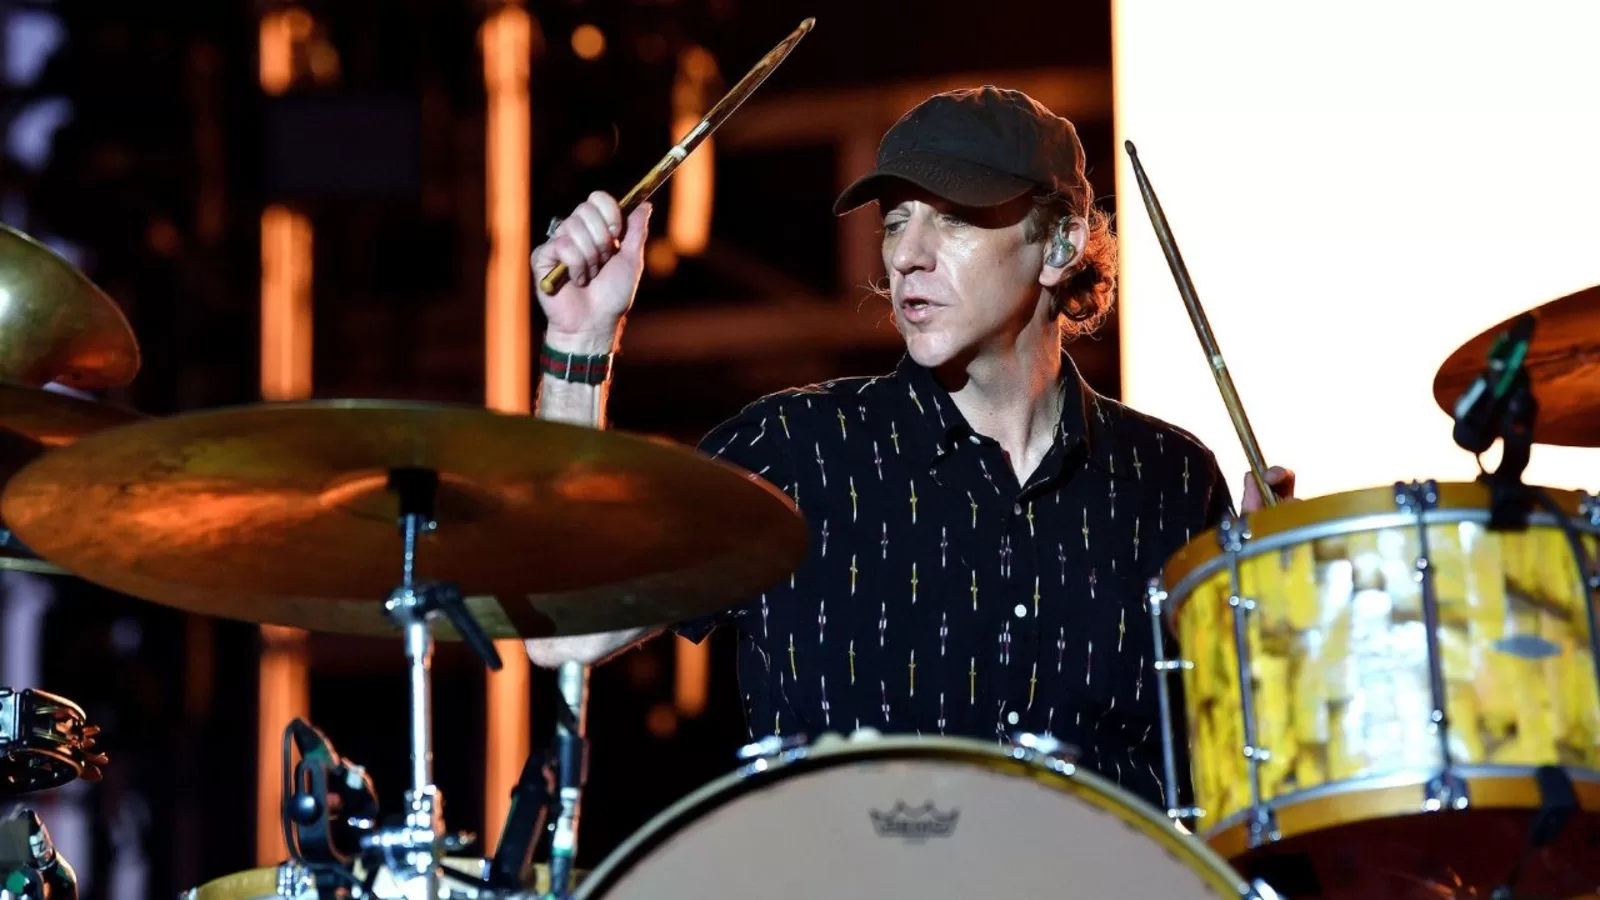 Modest Mouse drummer Jeremiah Green dies at 45 days after announcing stage 4 cancer diagnosis